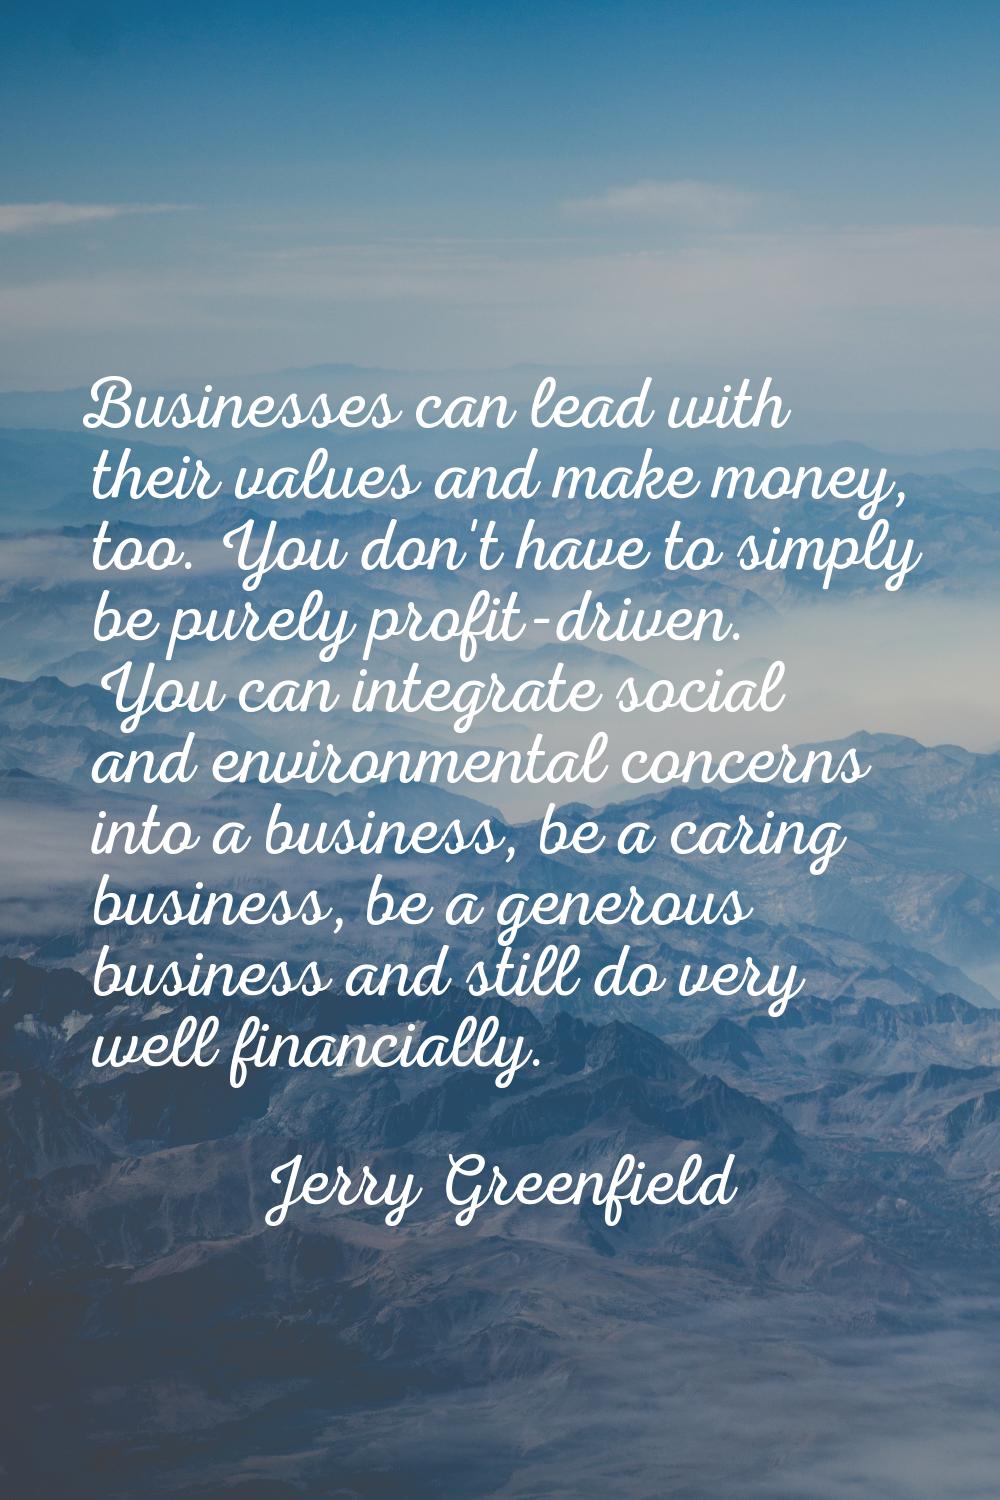 Businesses can lead with their values and make money, too. You don't have to simply be purely profi